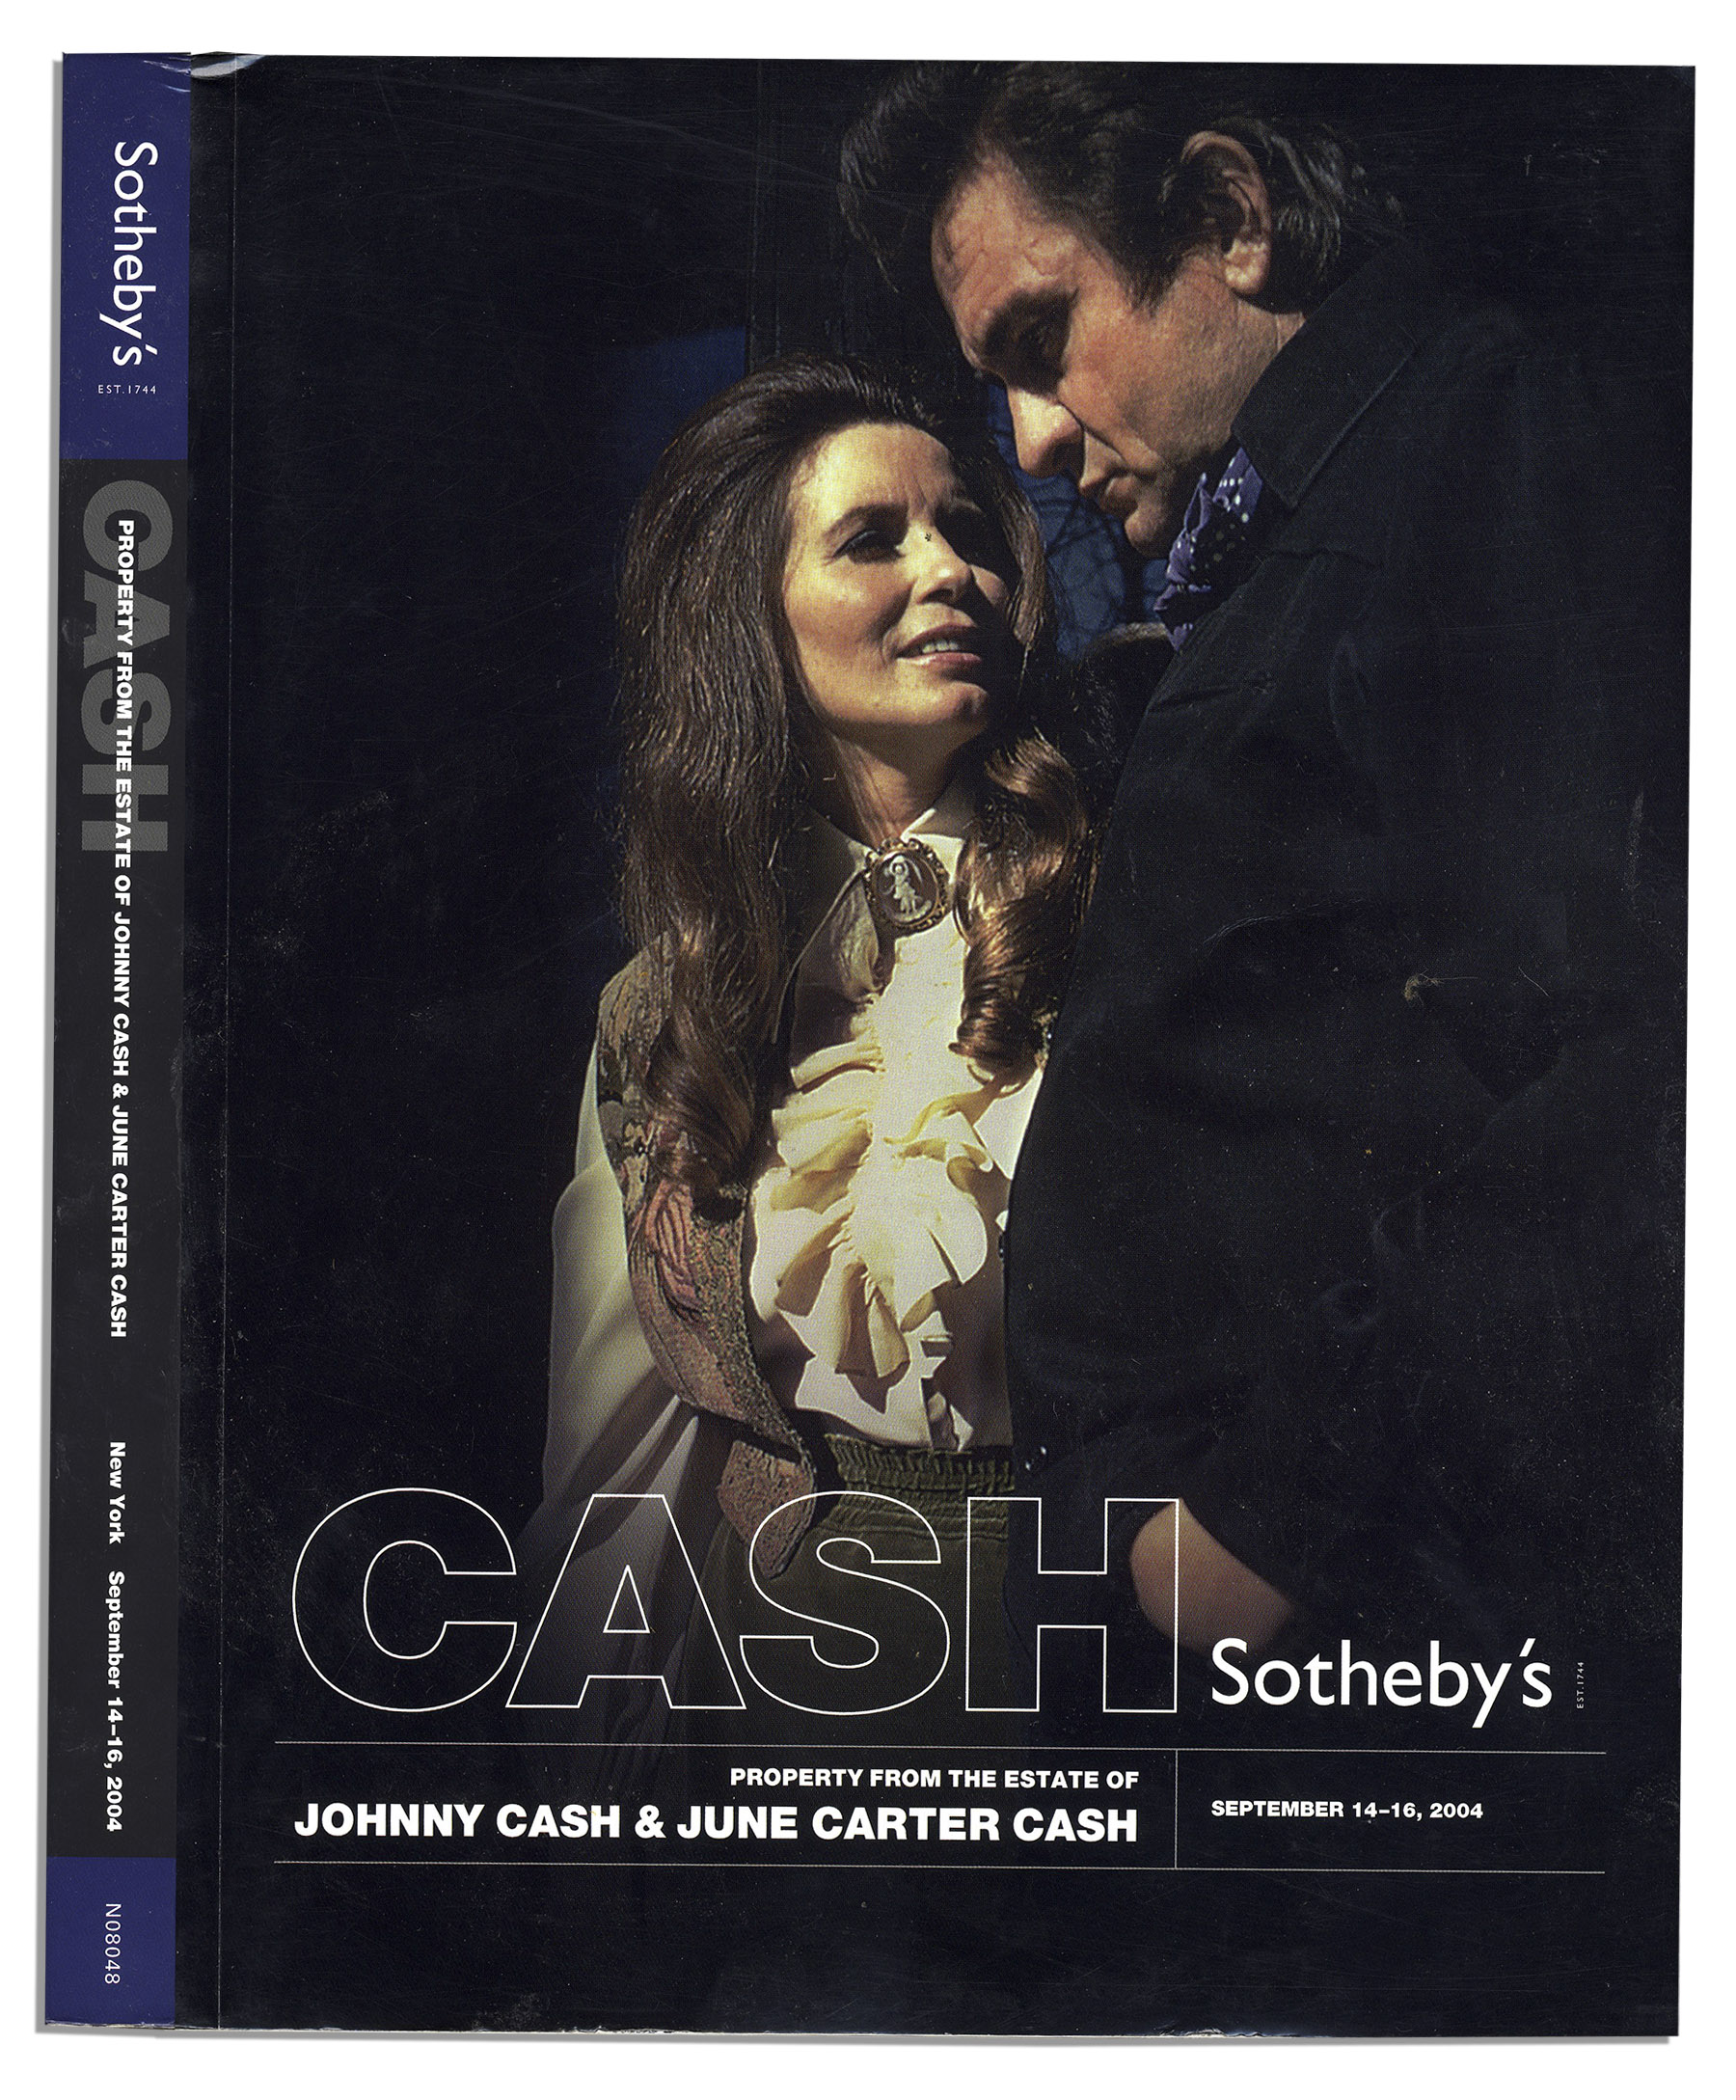 September 14-16, 2004 Sotheby’s Auction Of Property From The Estate of Johnny Cash Estate